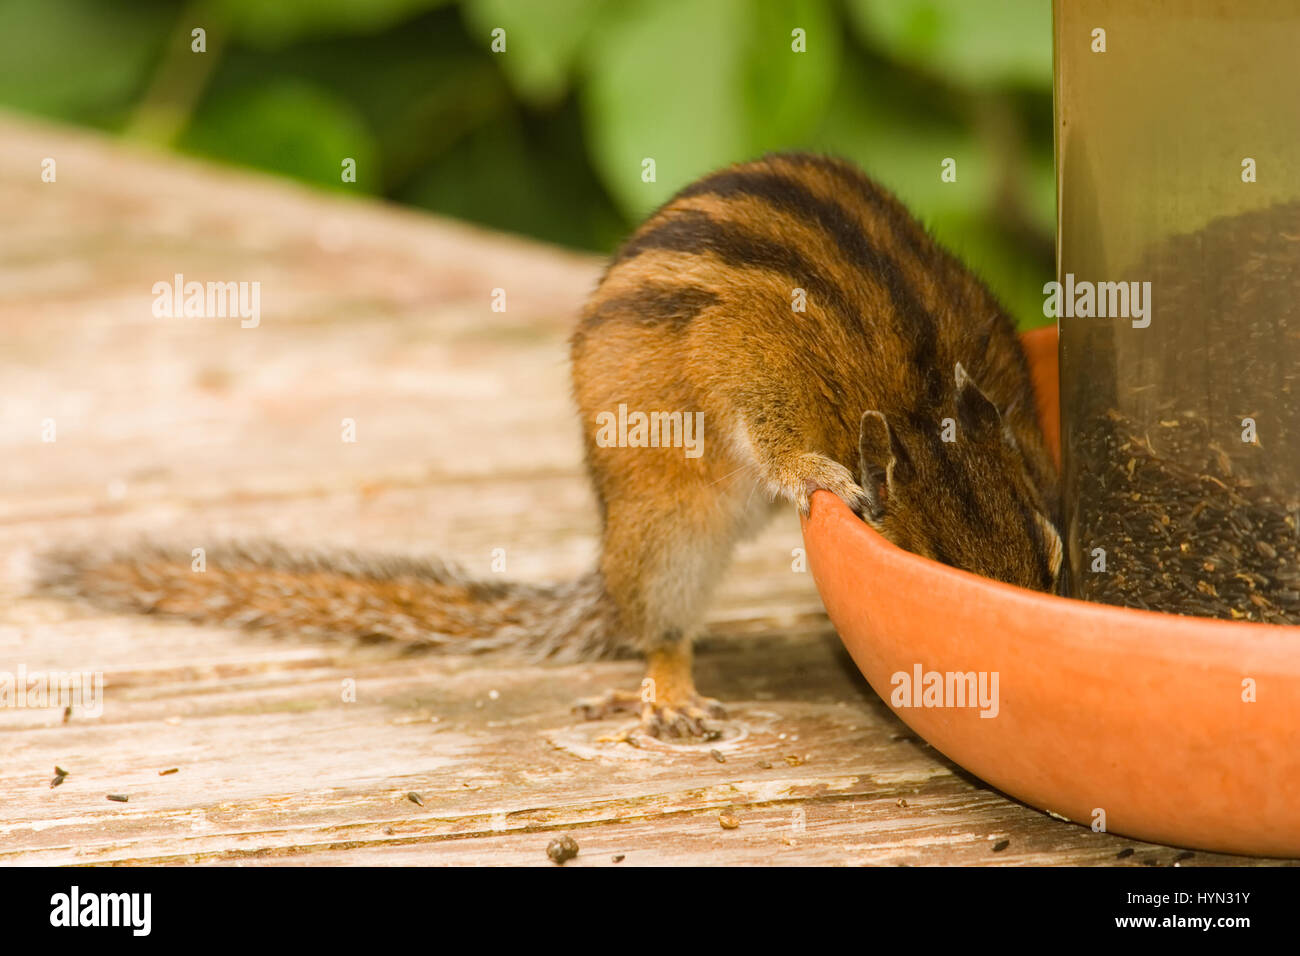 Yellow-pine Chipmunk (Eutamias amoenus) eating nijer seed from a bird feeder sitting on a wooden deck in Issaquah, Washington, USA Stock Photo